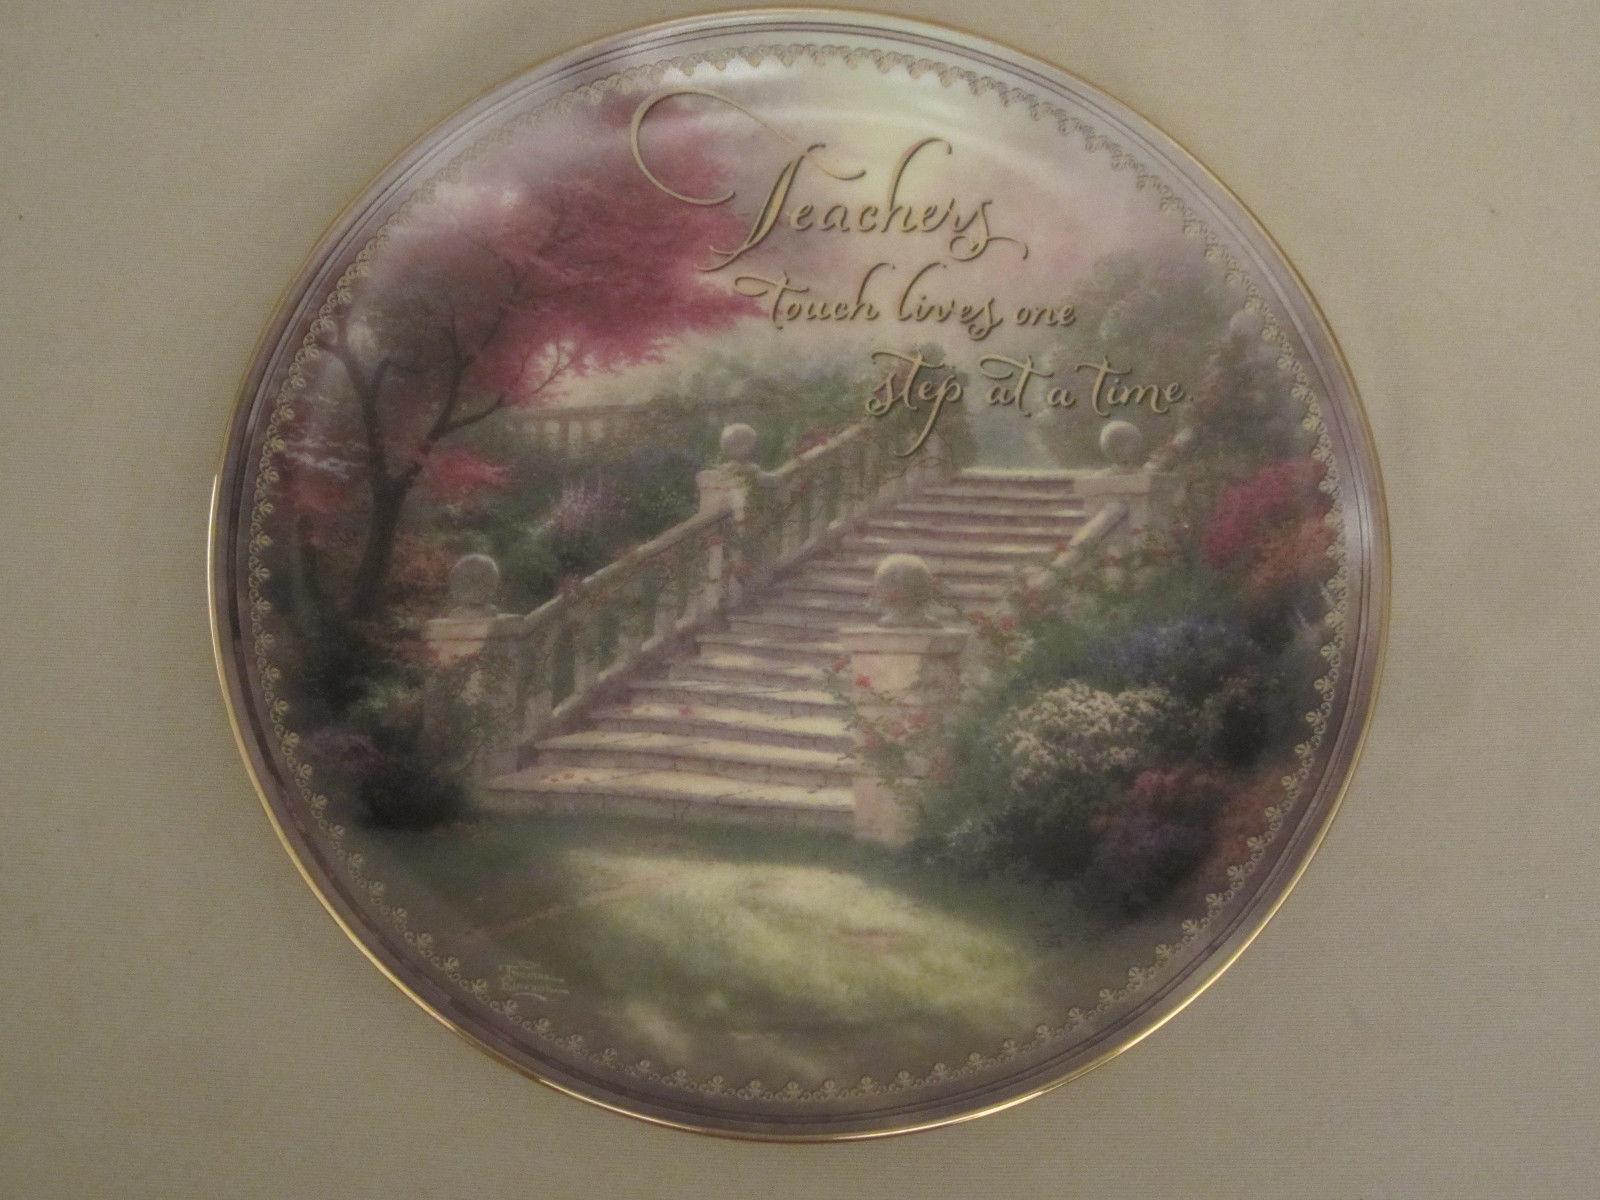 THOMAS KINKADE Collector Plate STAIRWAY TO PARADISE  Teachers touch lives - $19.96